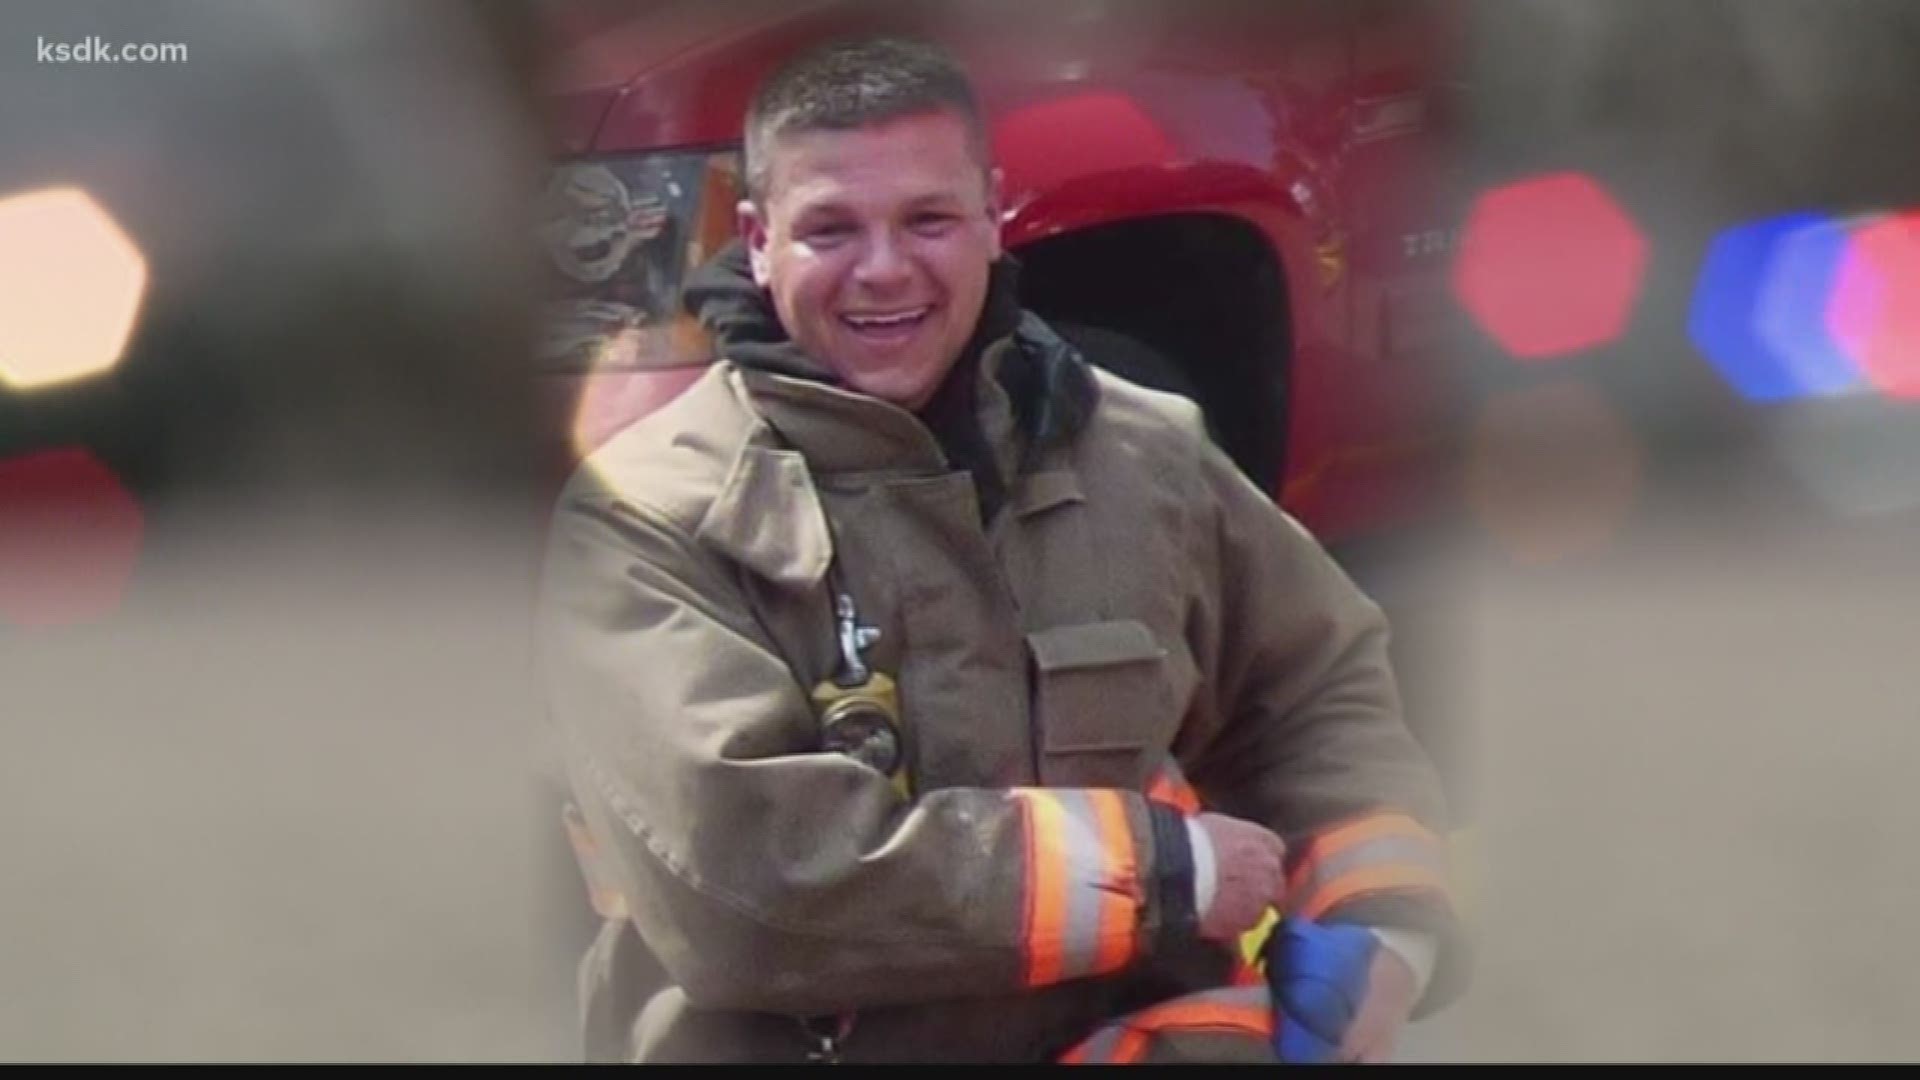 Capt. Jake Ringering was laid to rest Tuesday. Hundreds of firefighters, lined up to pay their respects to one of their own.